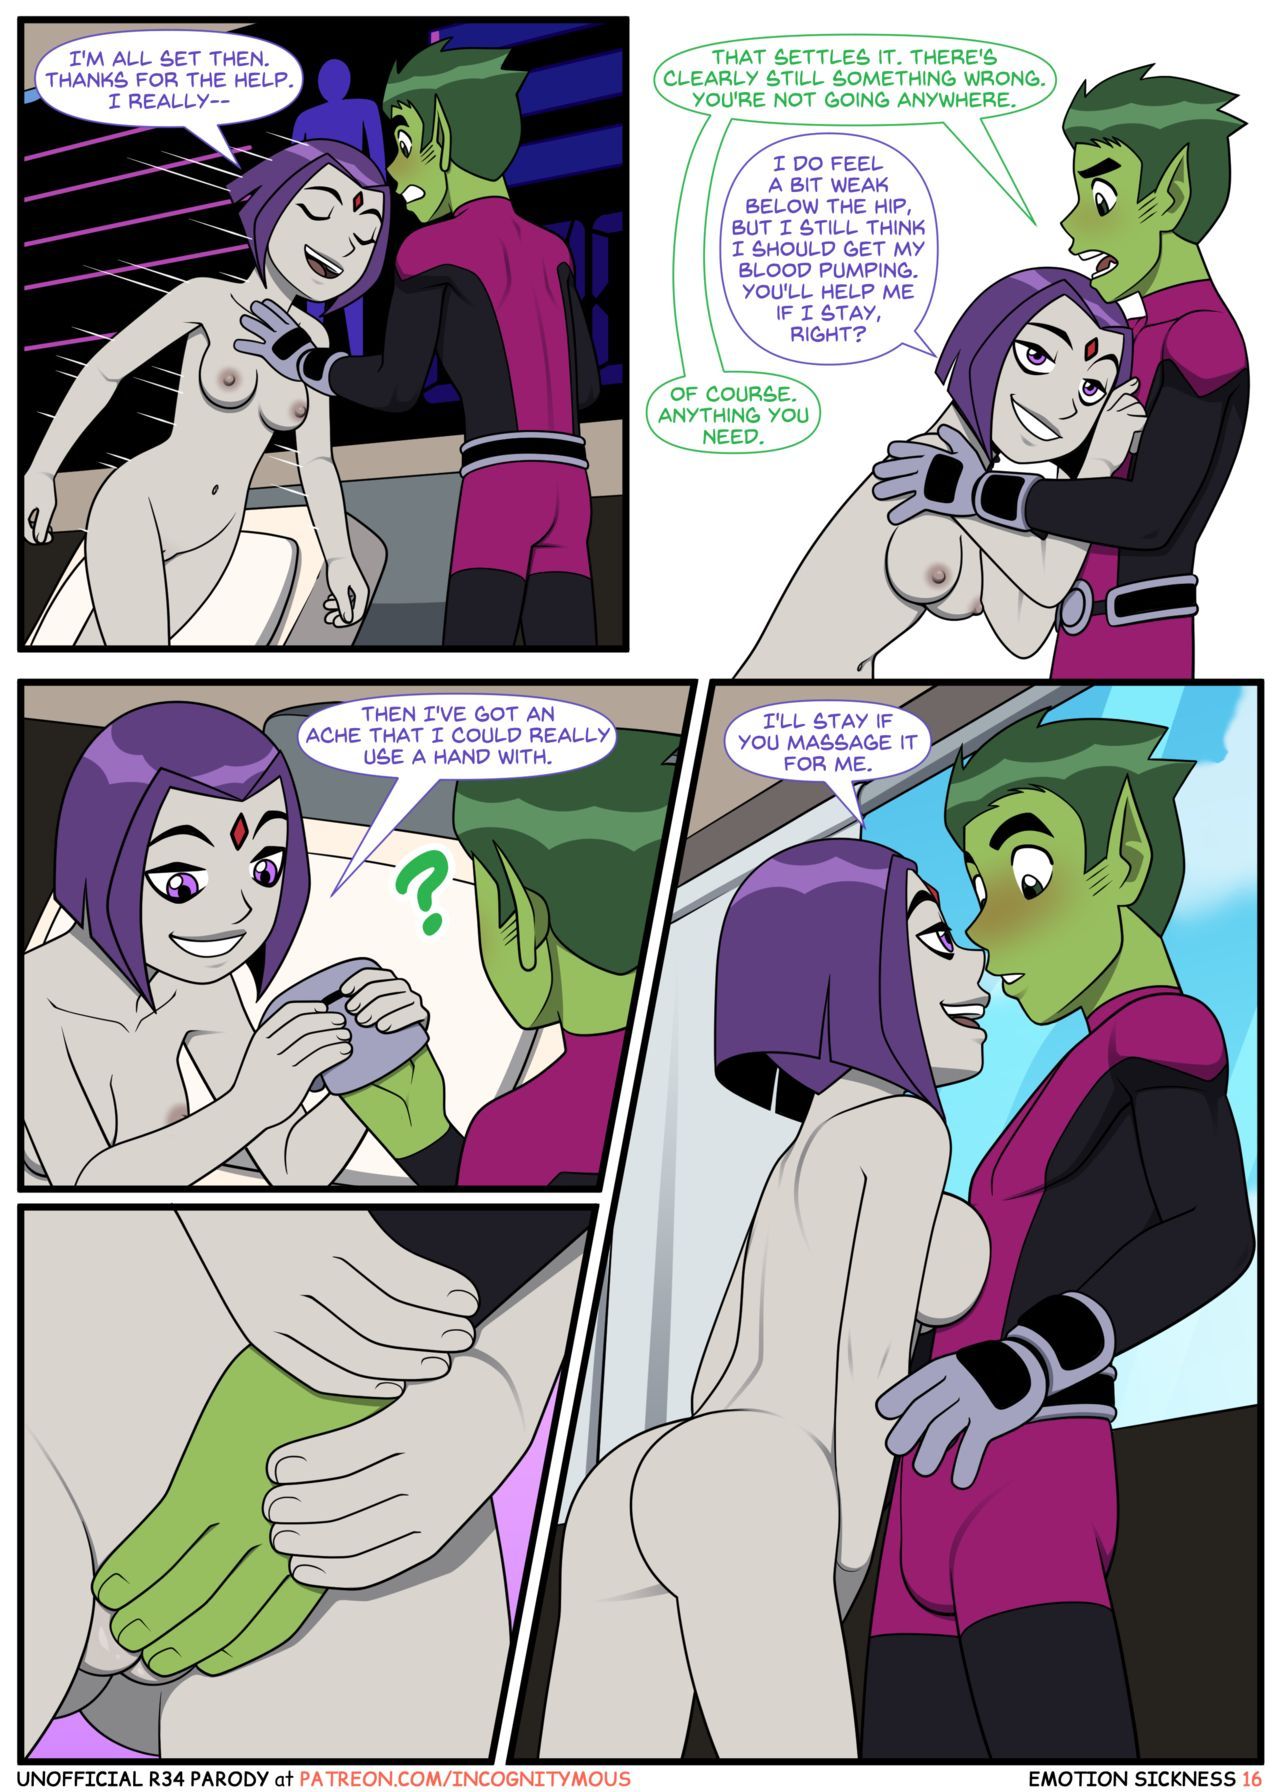 [Incognitymous] Emotion Sickness (Teen Titans) [Ongoing] 16